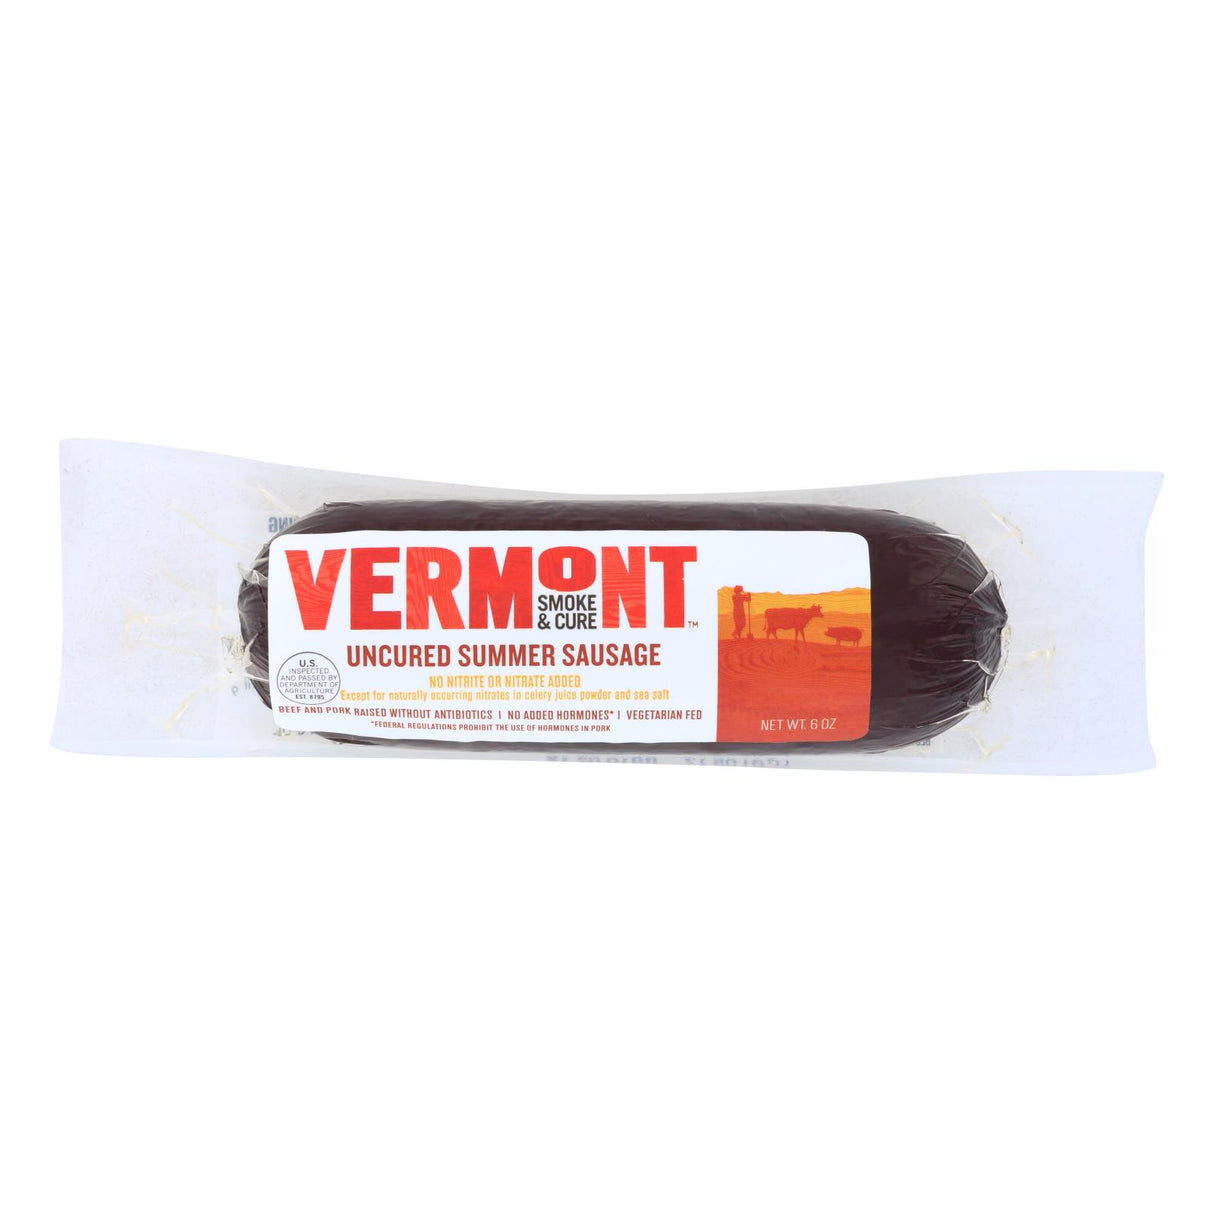 Vermont Smoke & Cure Summer Sausage for Snacking, 6 Oz., Case of 12 - Cozy Farm 